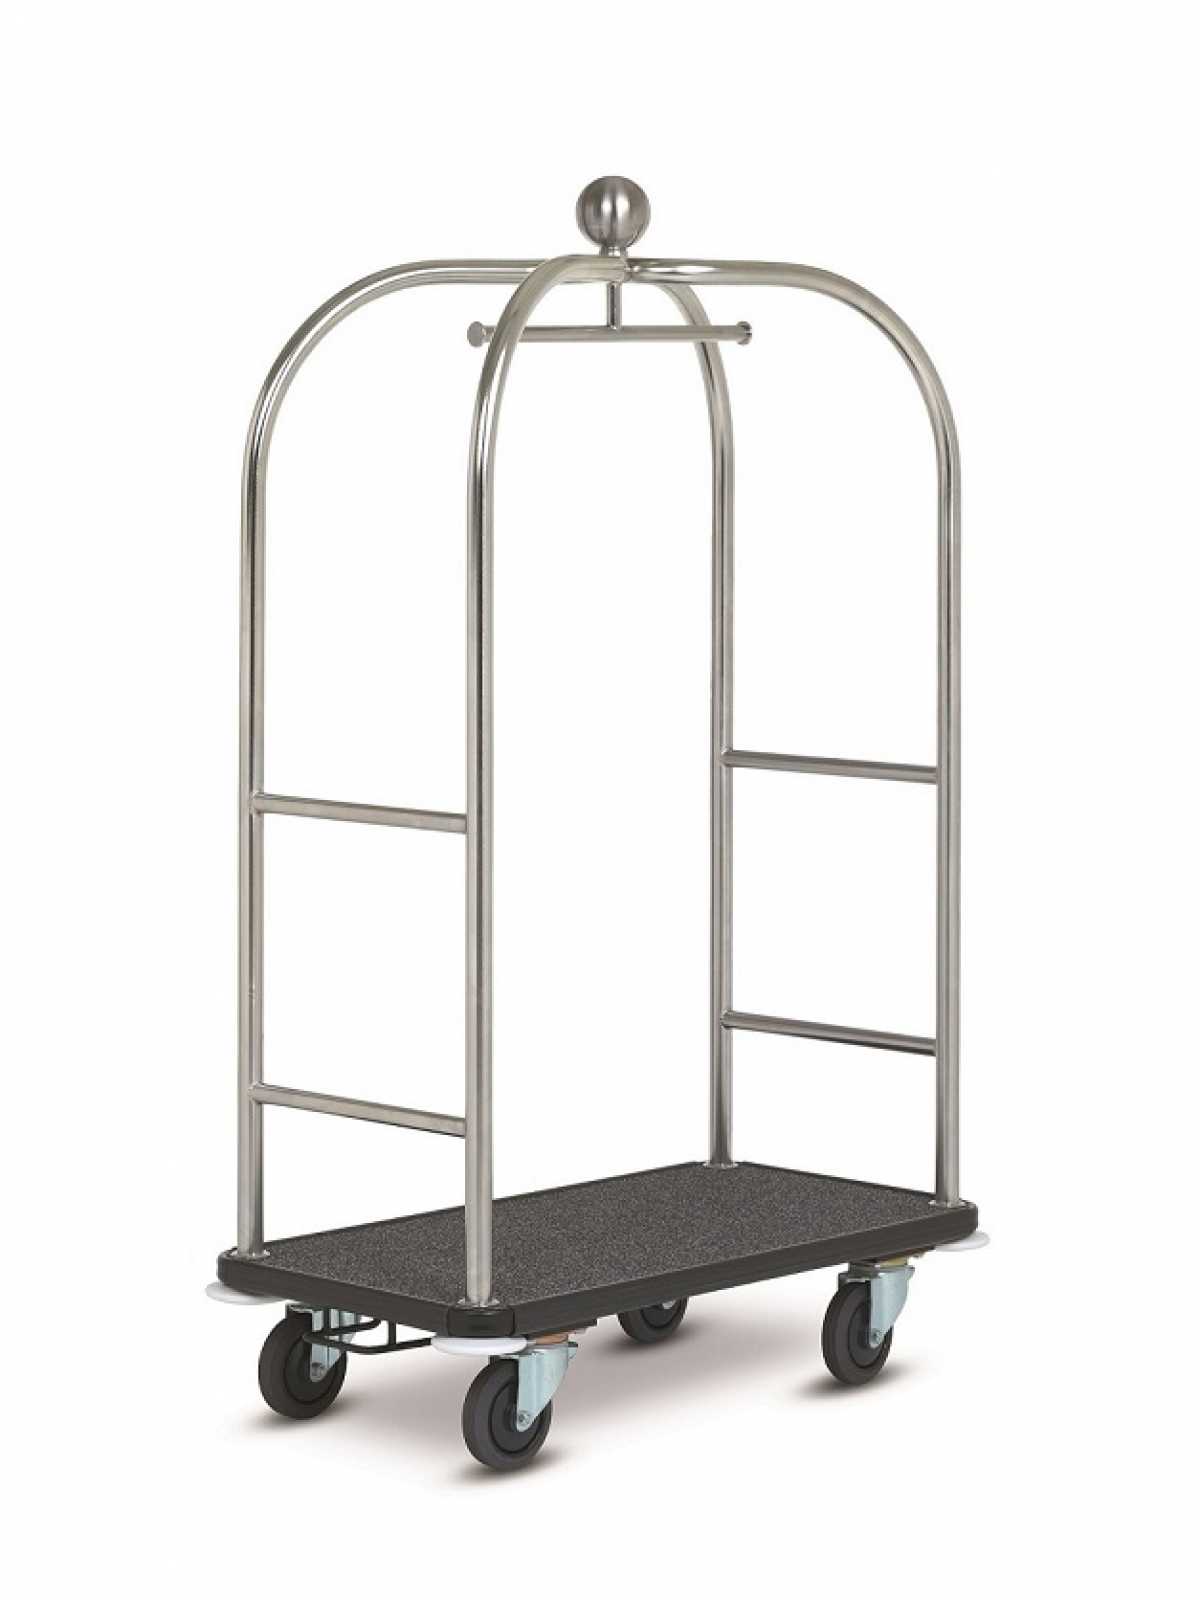 WANZL Luggage Collection Trolley GS-Lobby, Electro-polished stainless steel